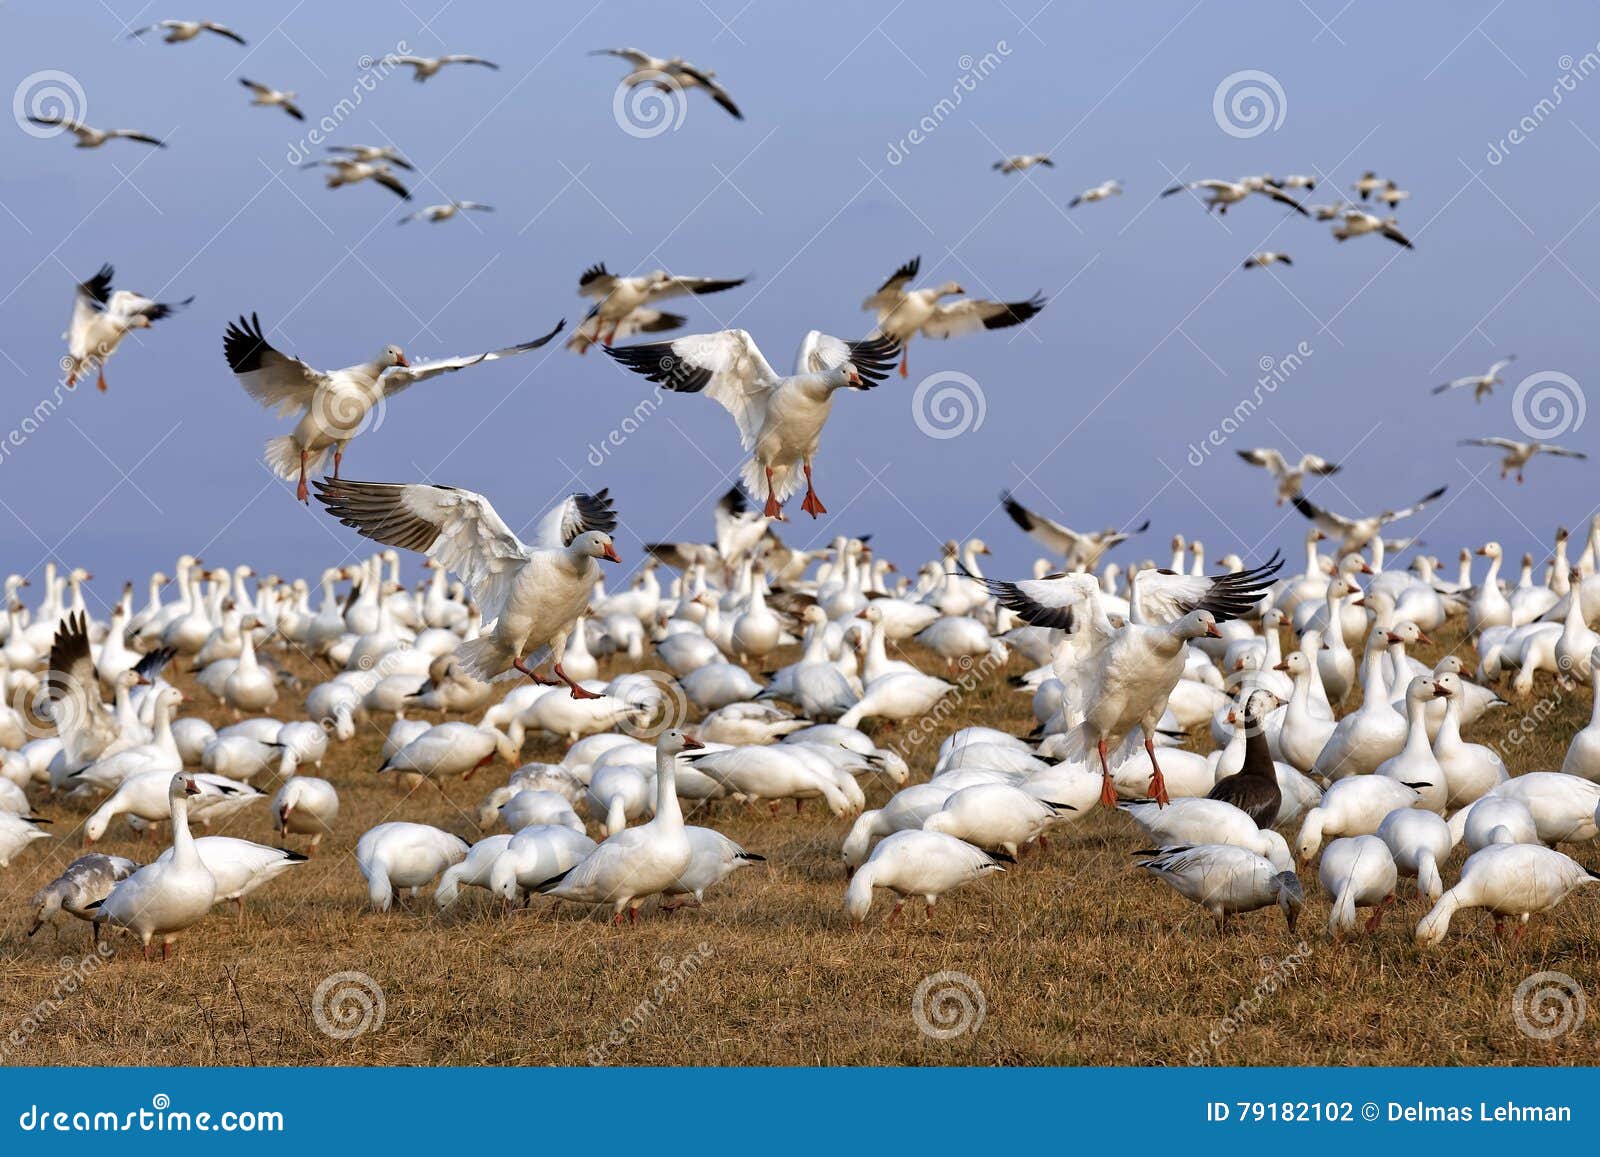 migrating snow geese fly in for feeding